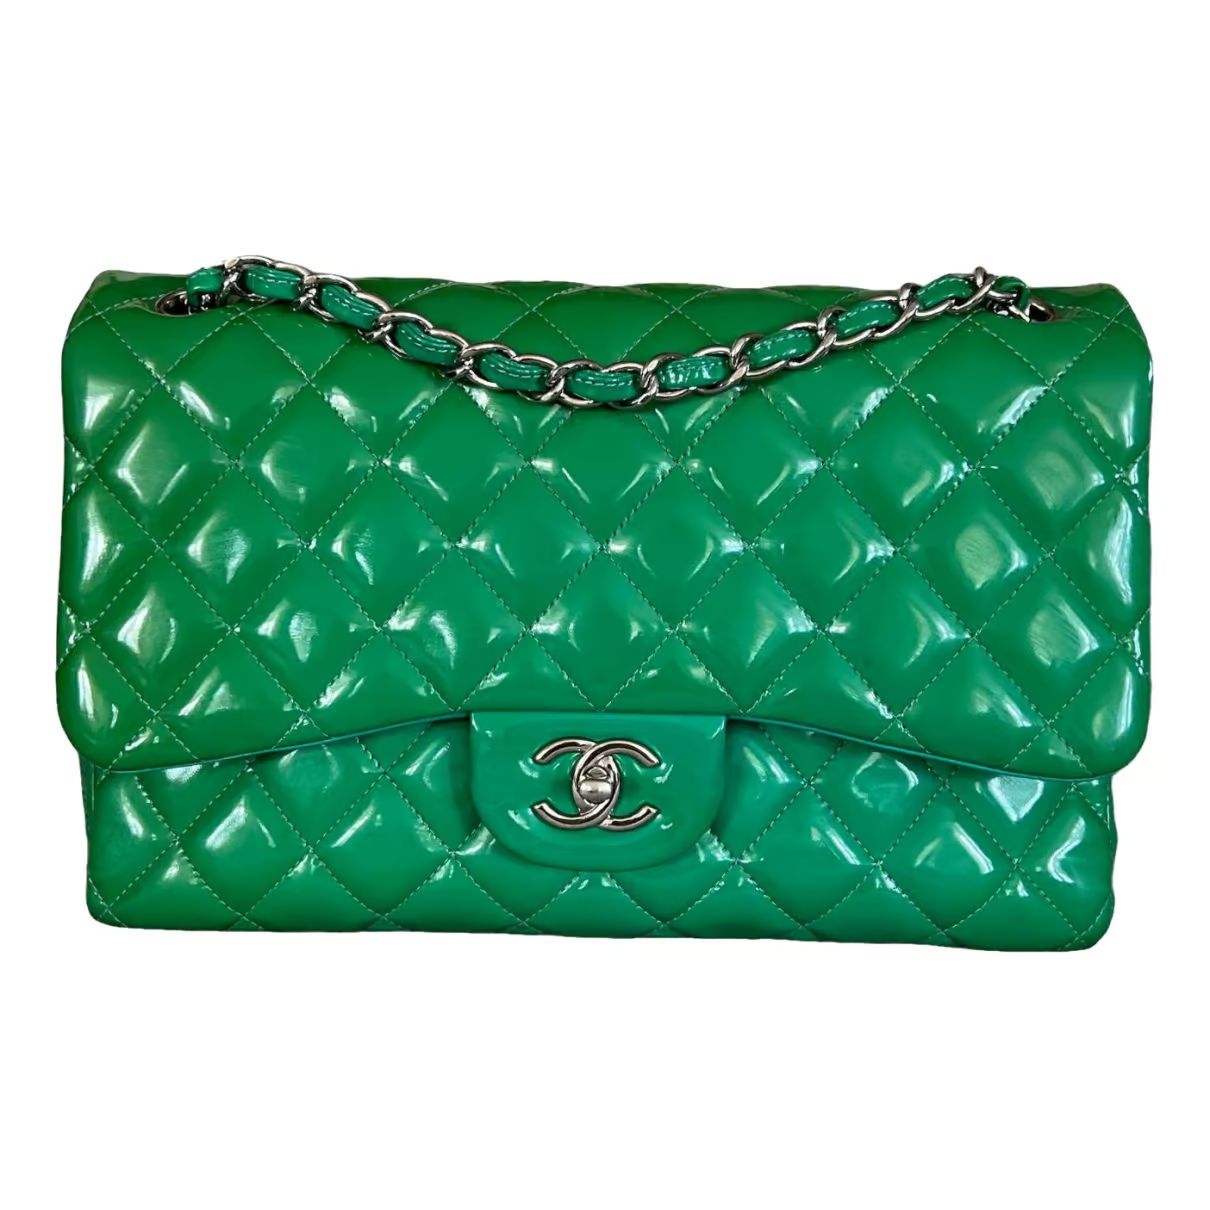 Timeless/classique patent leather handbag Chanel Green in Patent leather - 38228942 | Vestiaire Collective (Global)